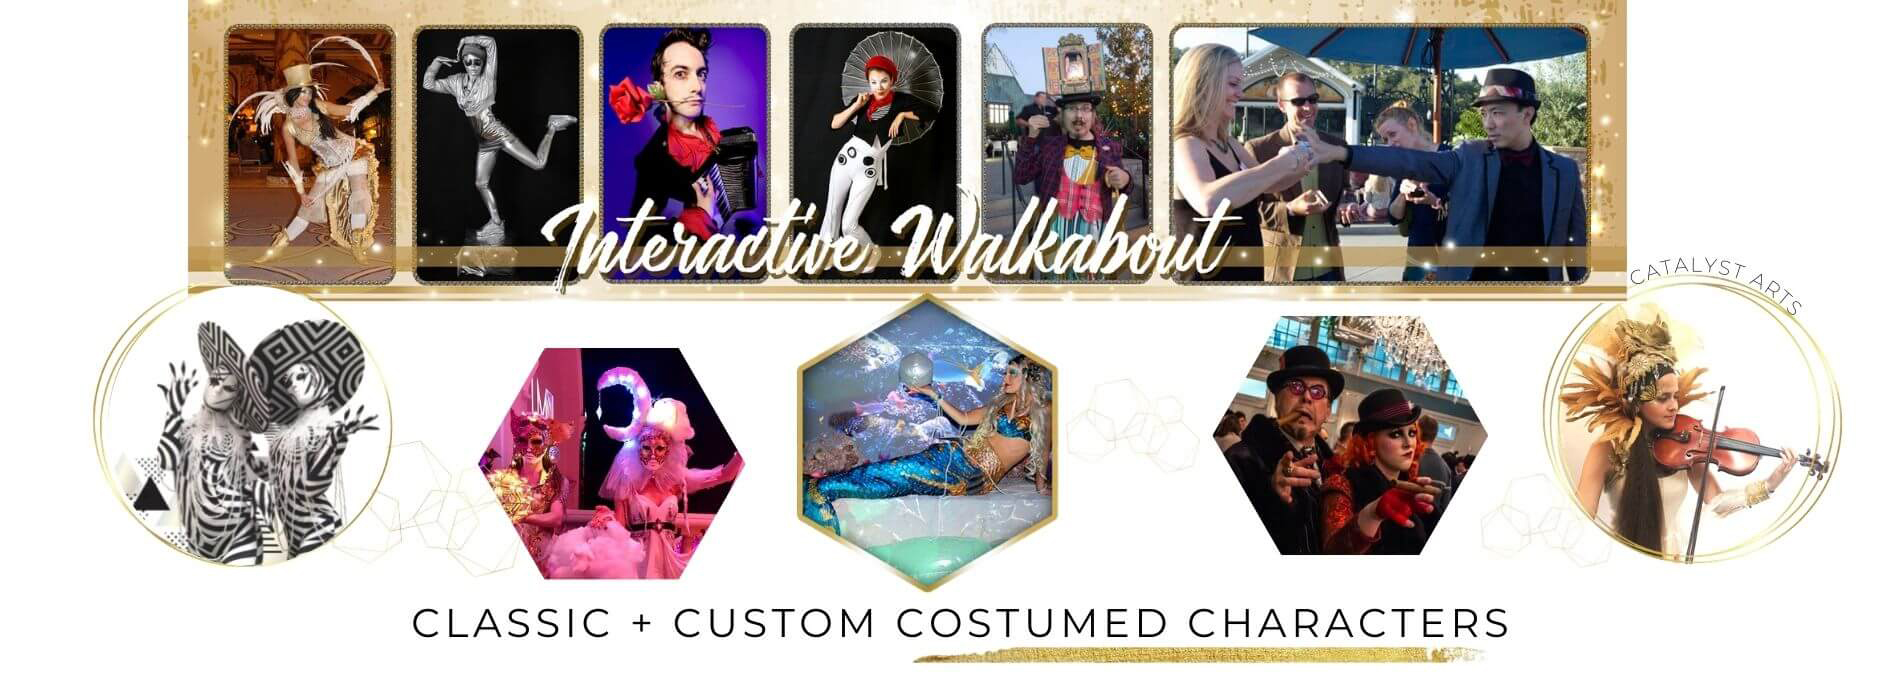 Interactive Walkabout & Costumed Characters by Catalyst Arts